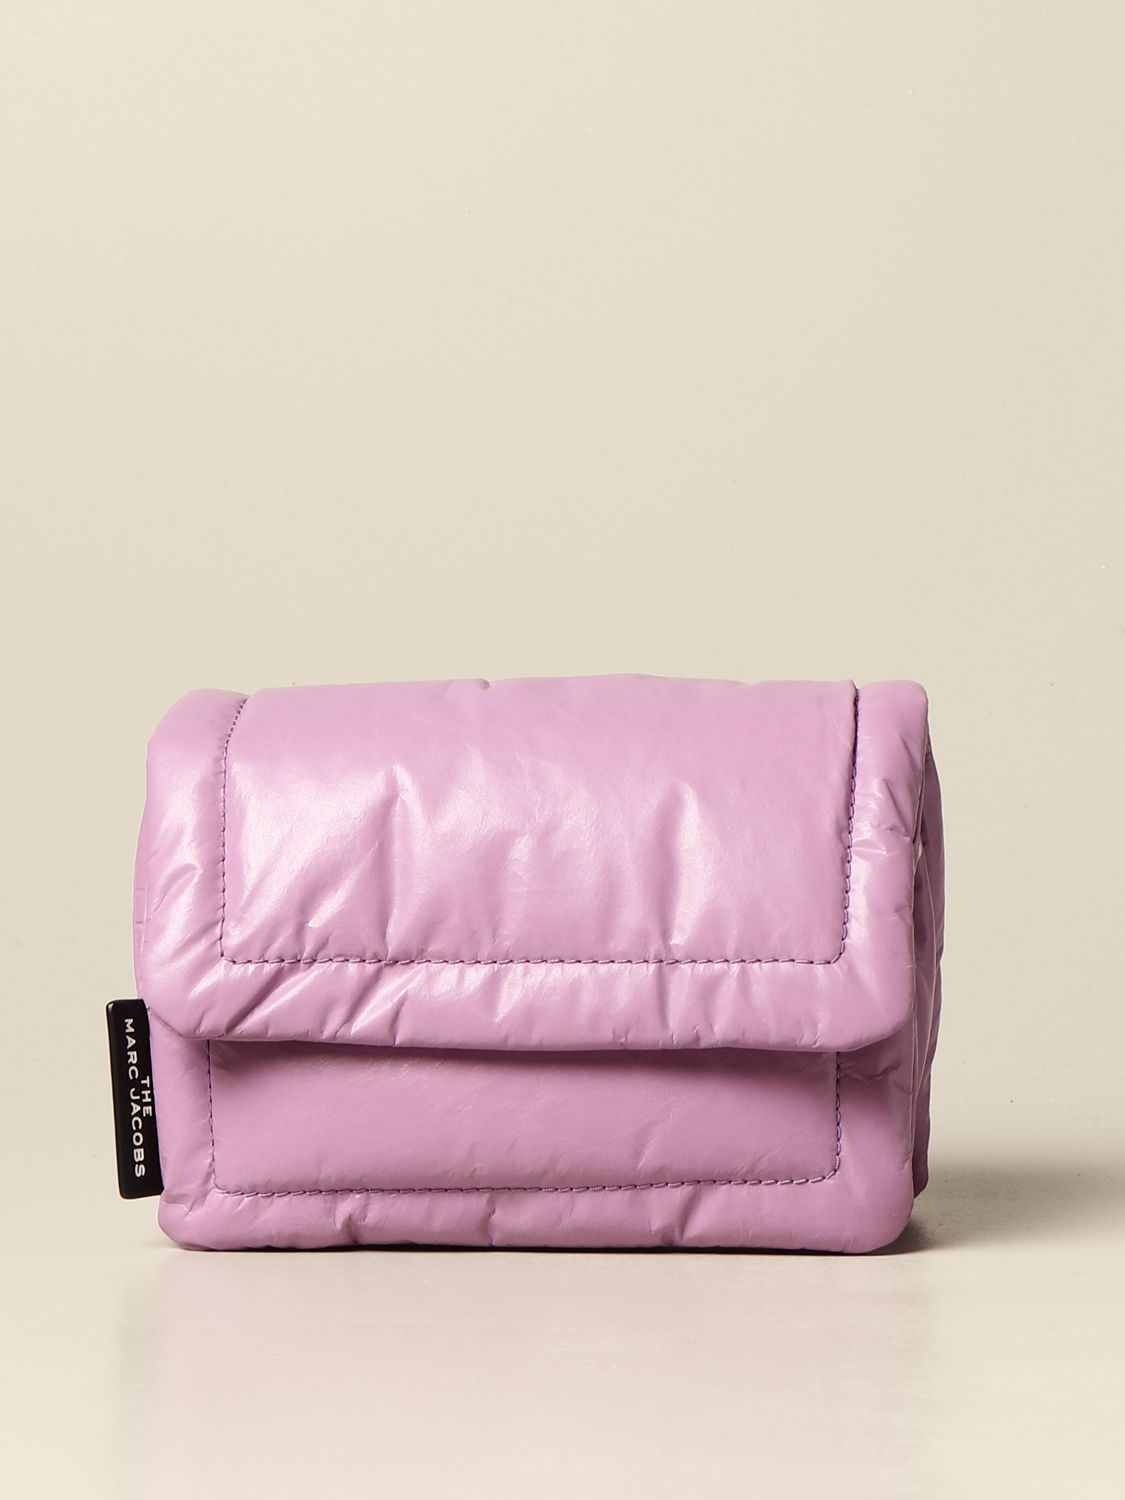 Marc Jacobs The Mini Cushion Bag in Pink Rose